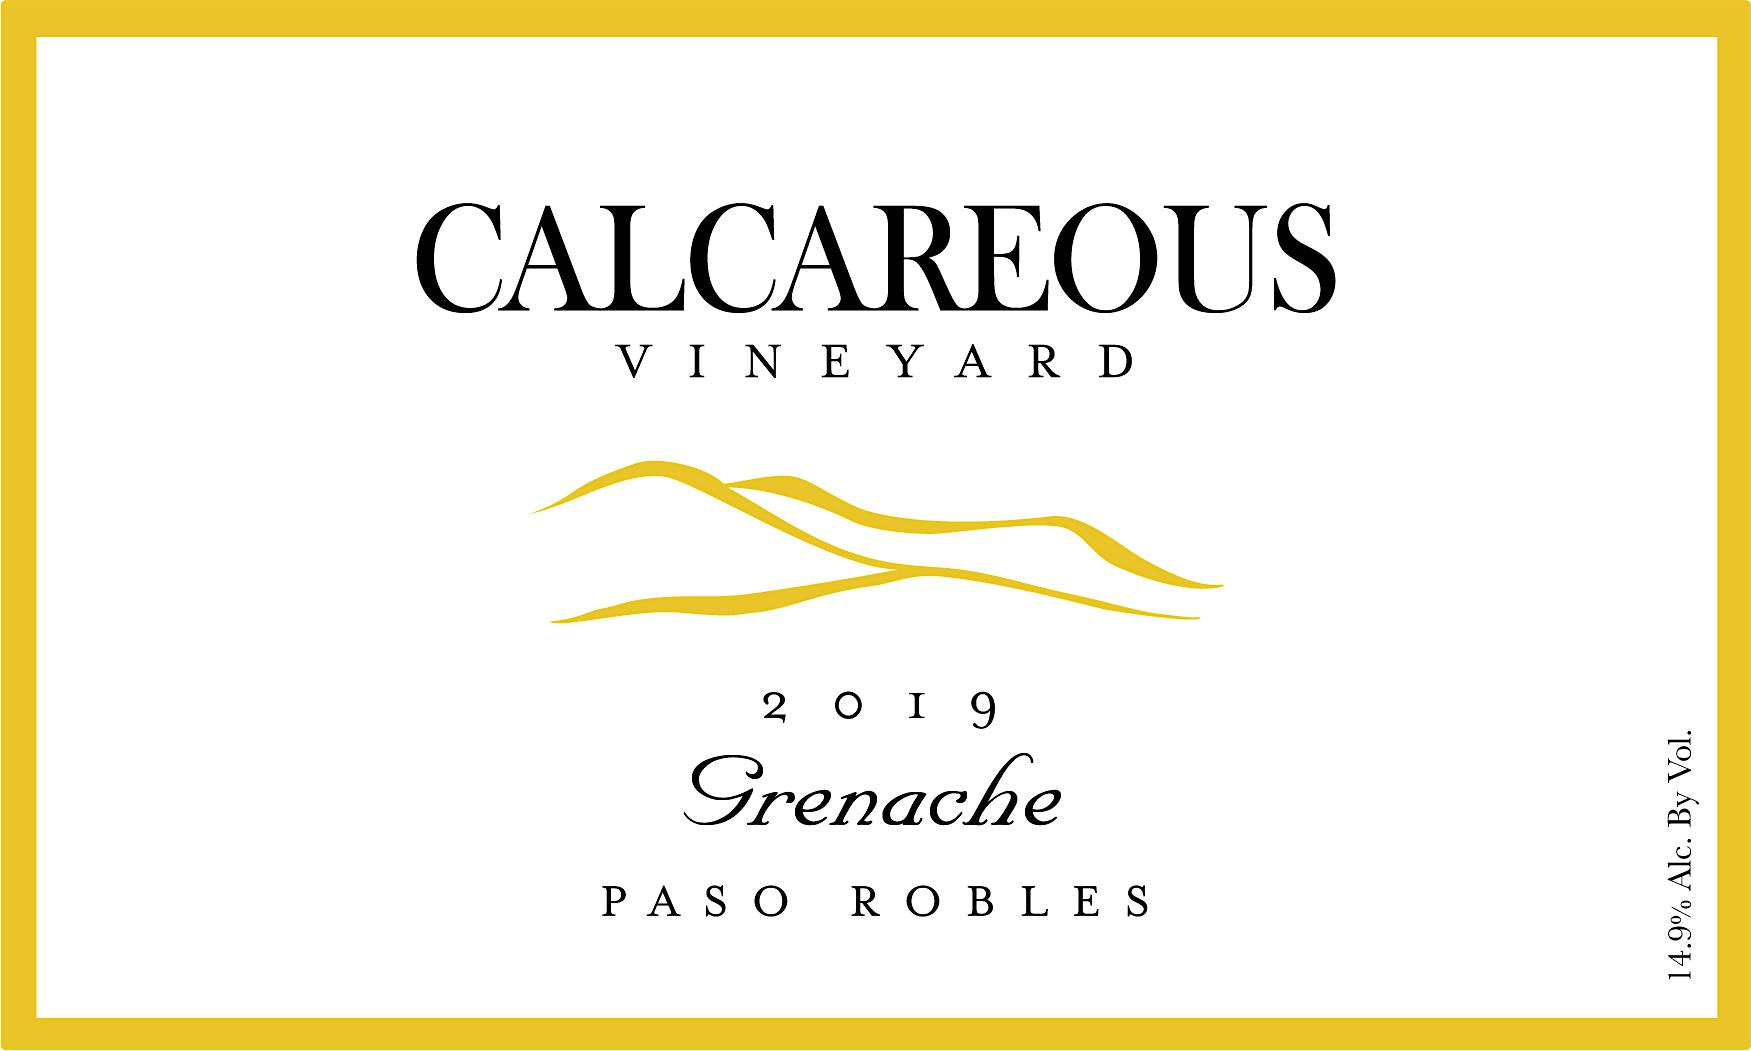 Label for Calcareous